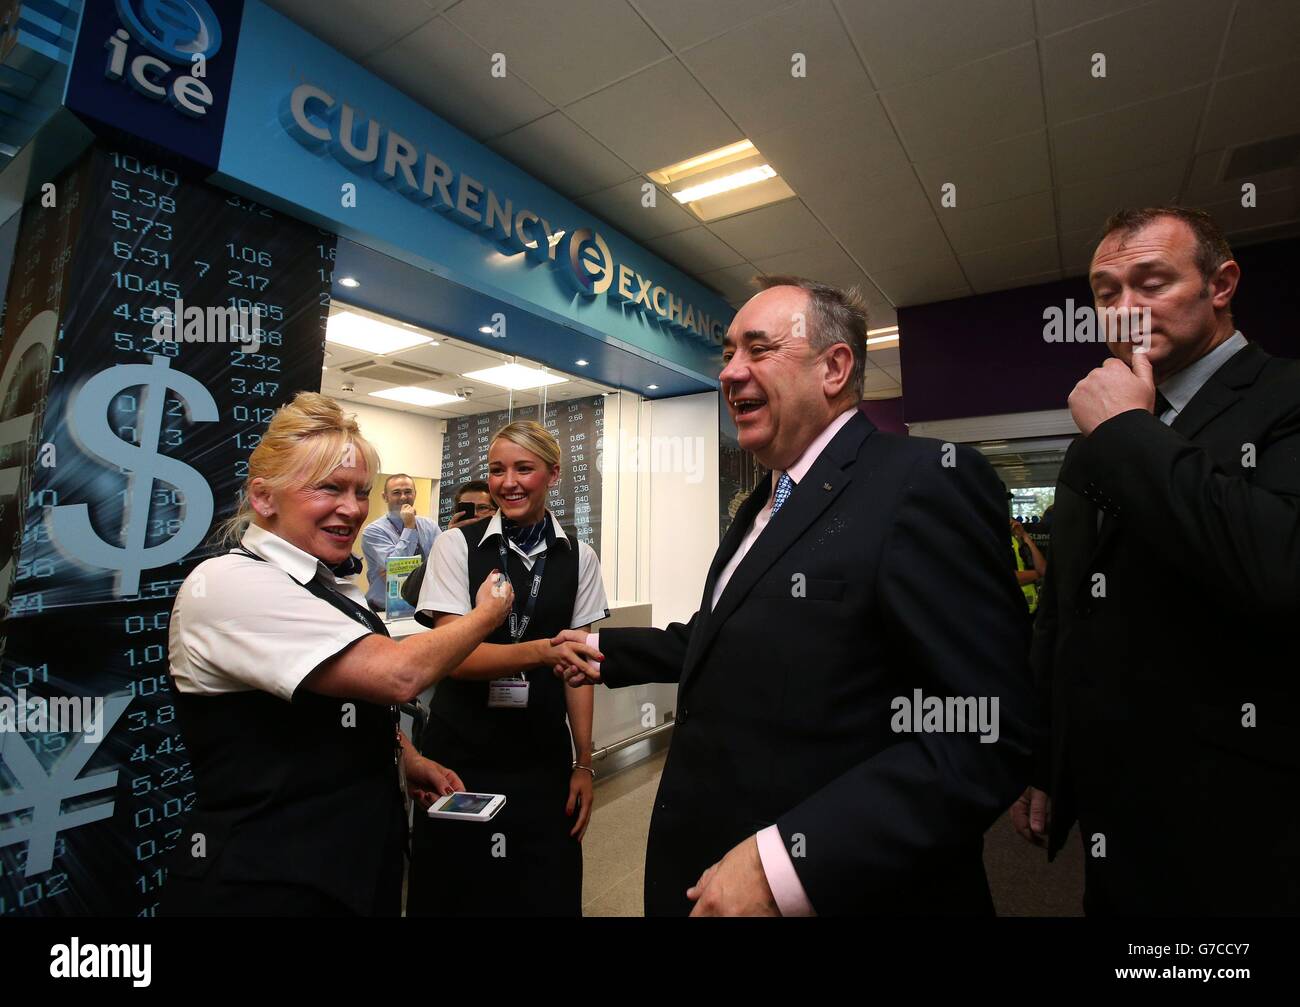 First Minister Alex Salmond speaks with staff outside the Currency Exchange as he arrrives at Edinburgh Airport to meet with Business leaders at a photocall ahead of the Scottish Referendum. Stock Photo